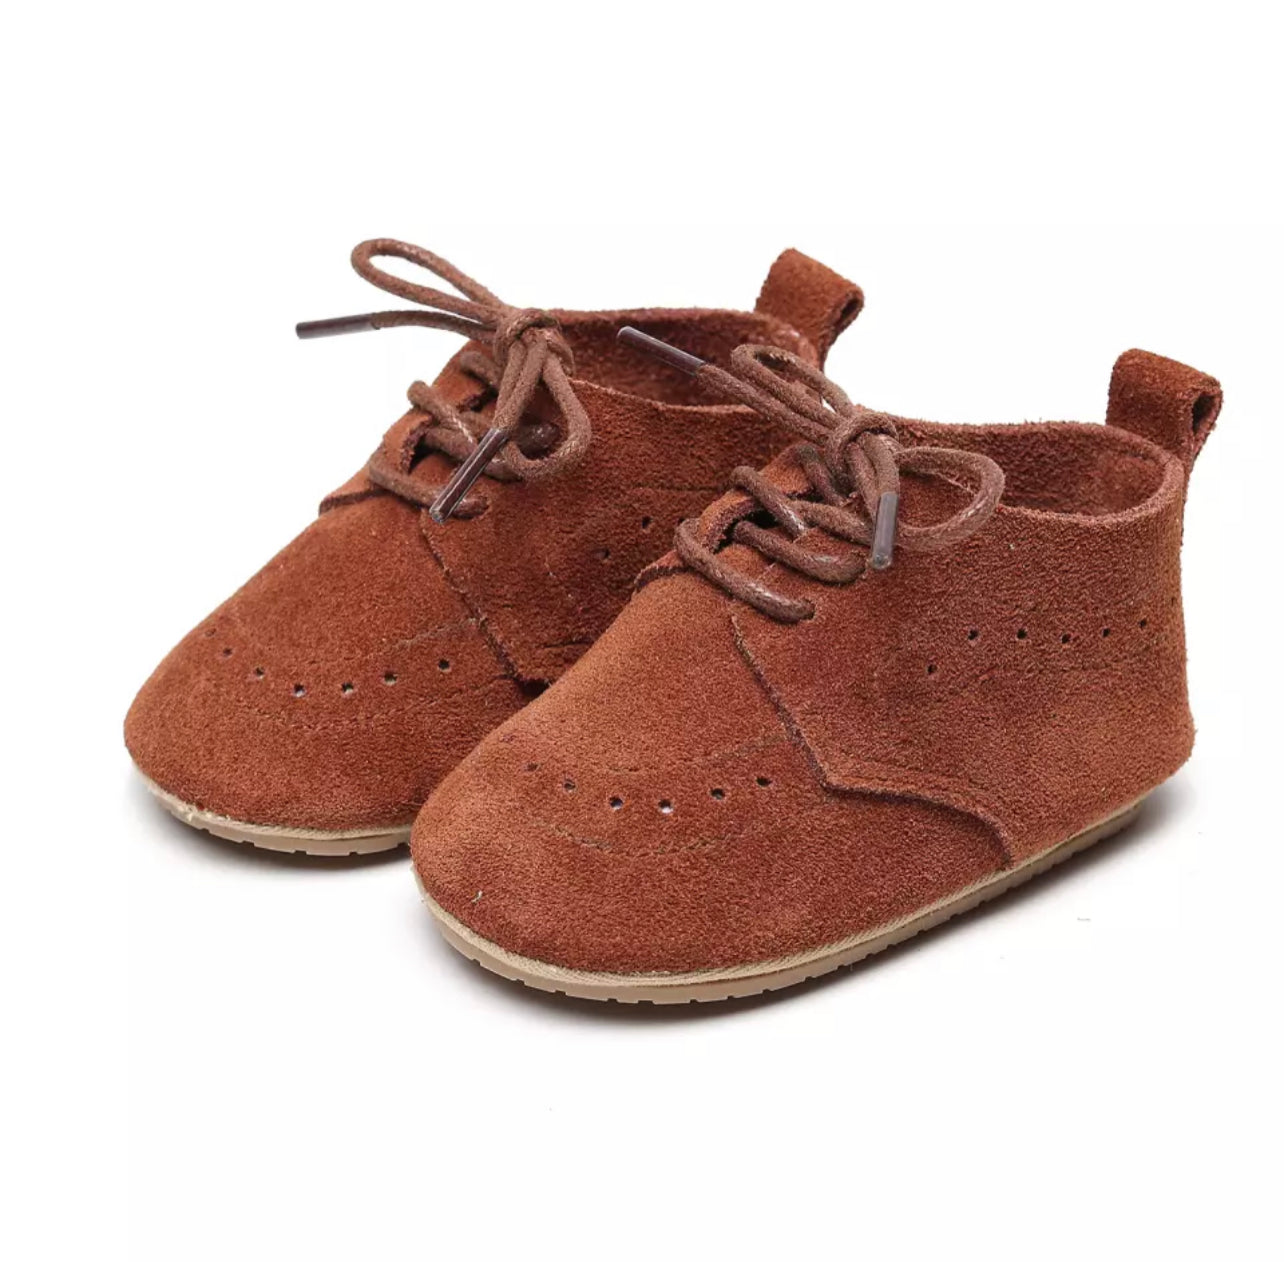 The Suede Winter Shoes - 2 Colors